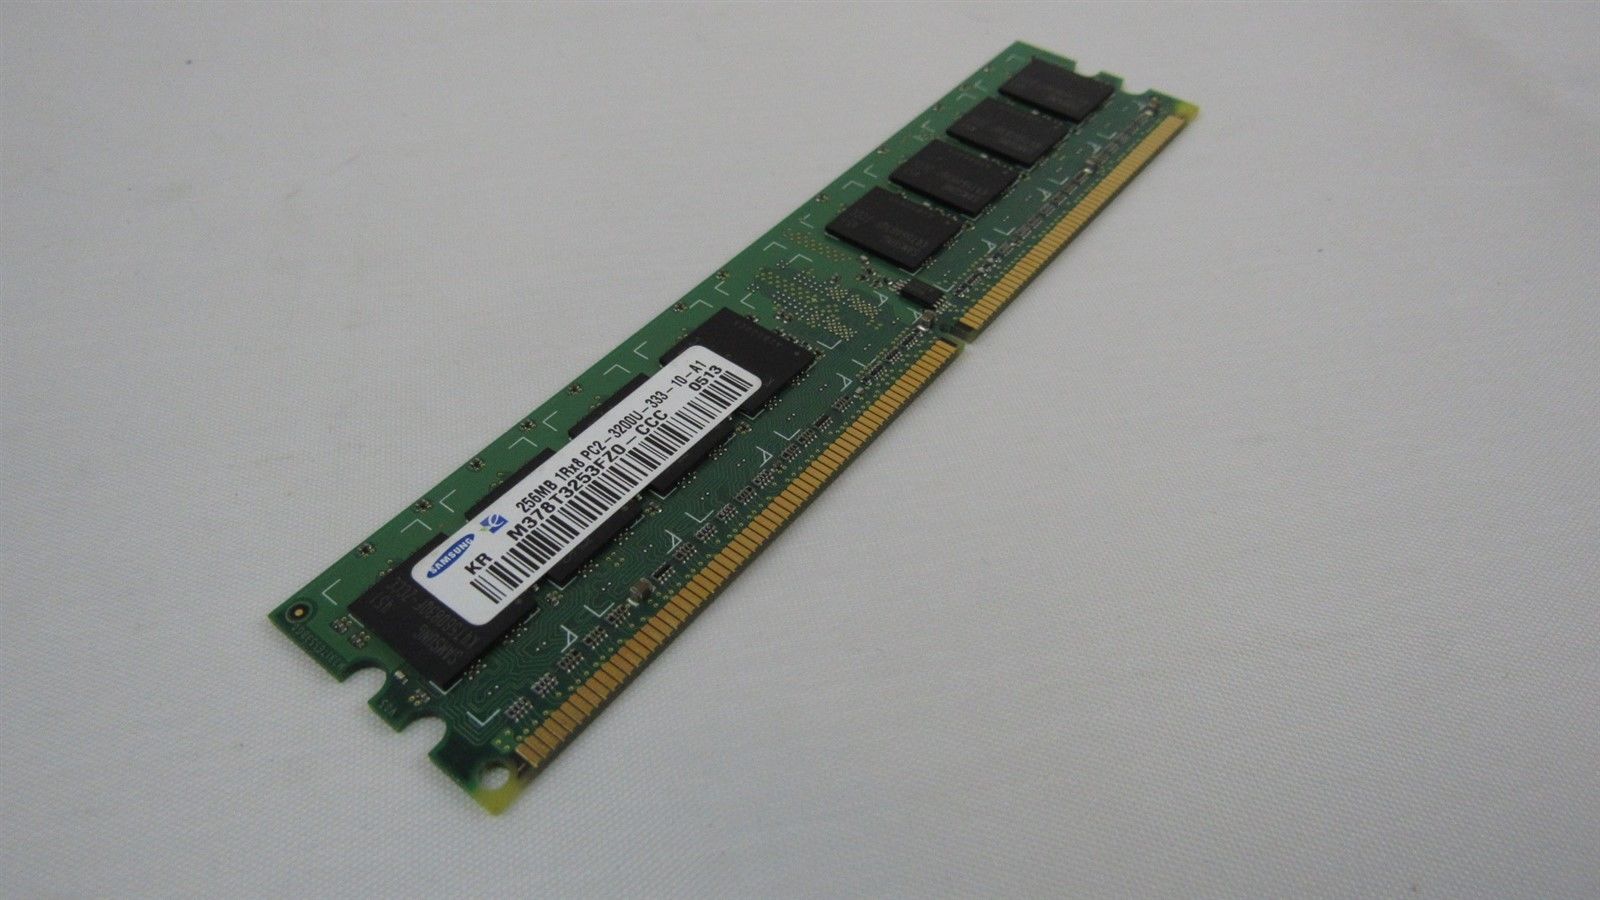 Dell 256MB PC2-3200 DDR2 400MHz CL3 240-Pin DIMM Memory C6795 0C6795